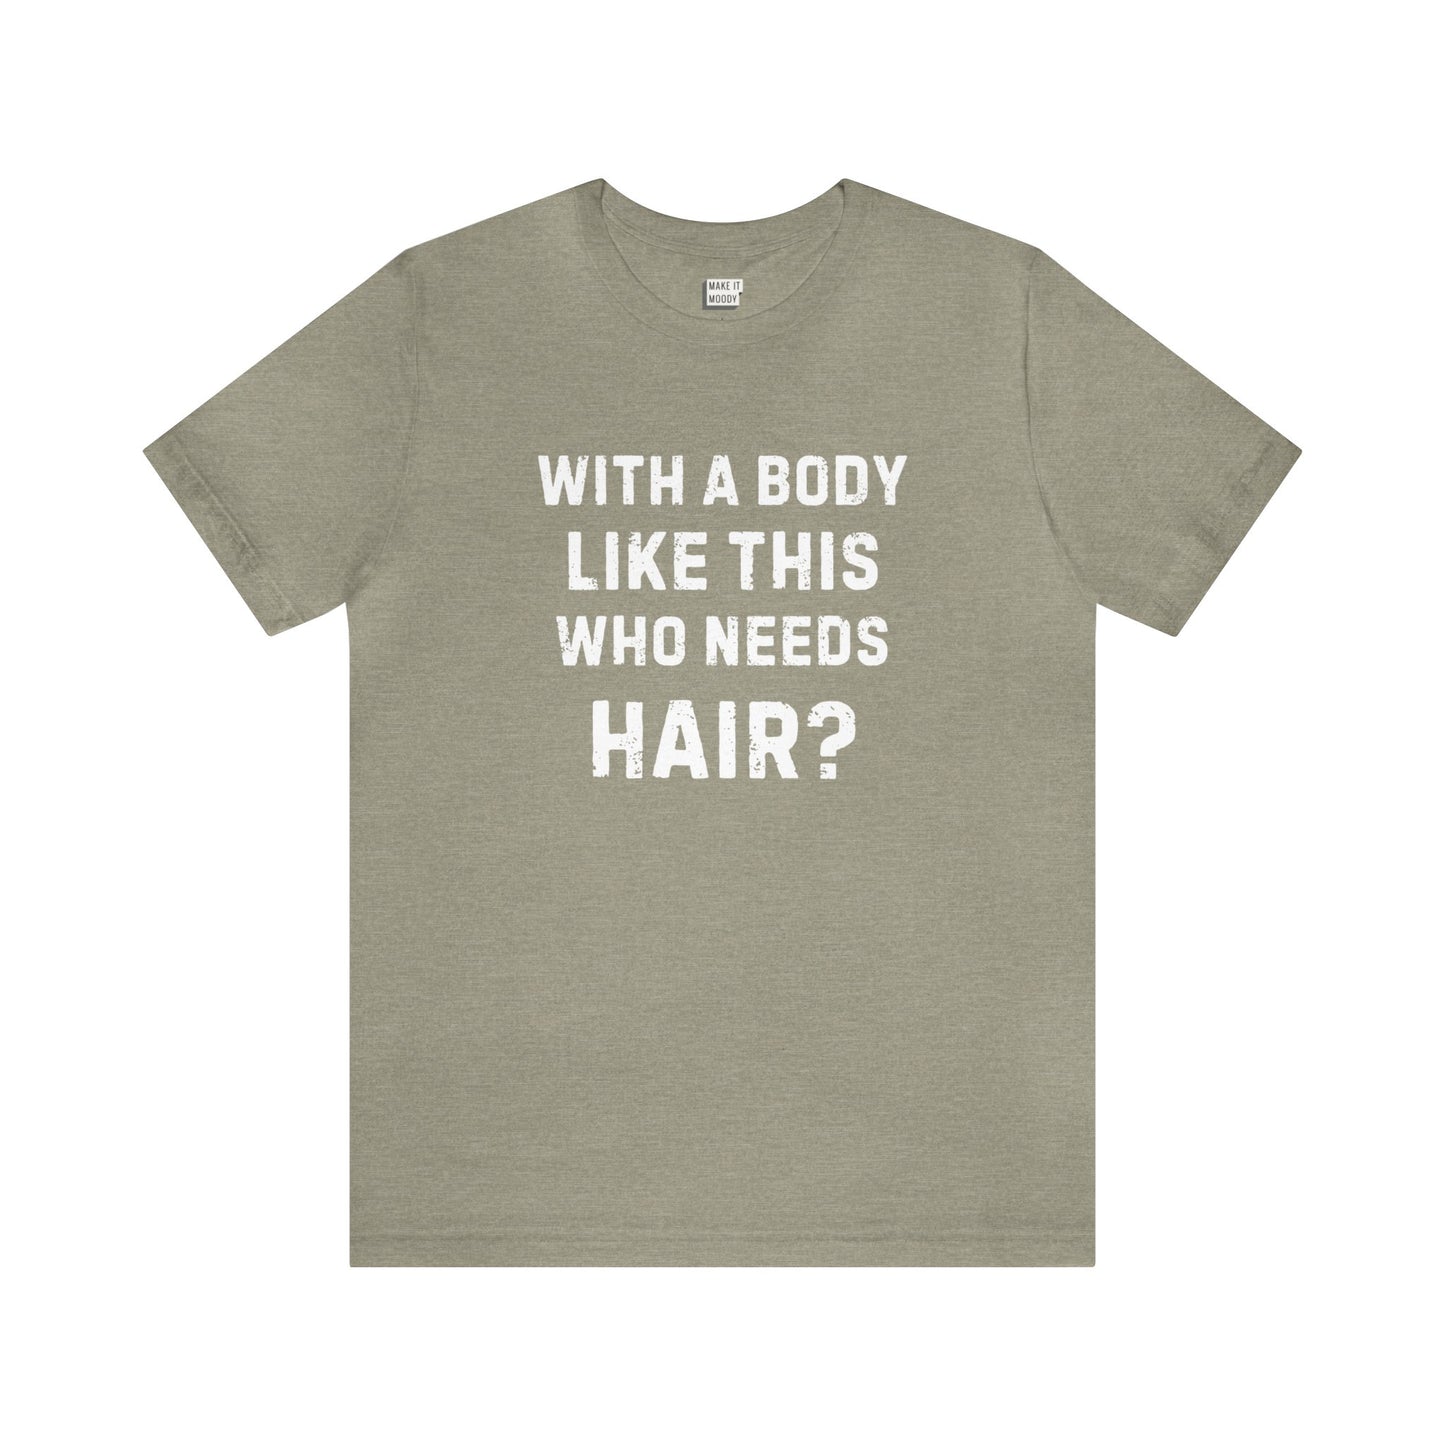 "With a Body Like This Who Needs Hair?" Tee